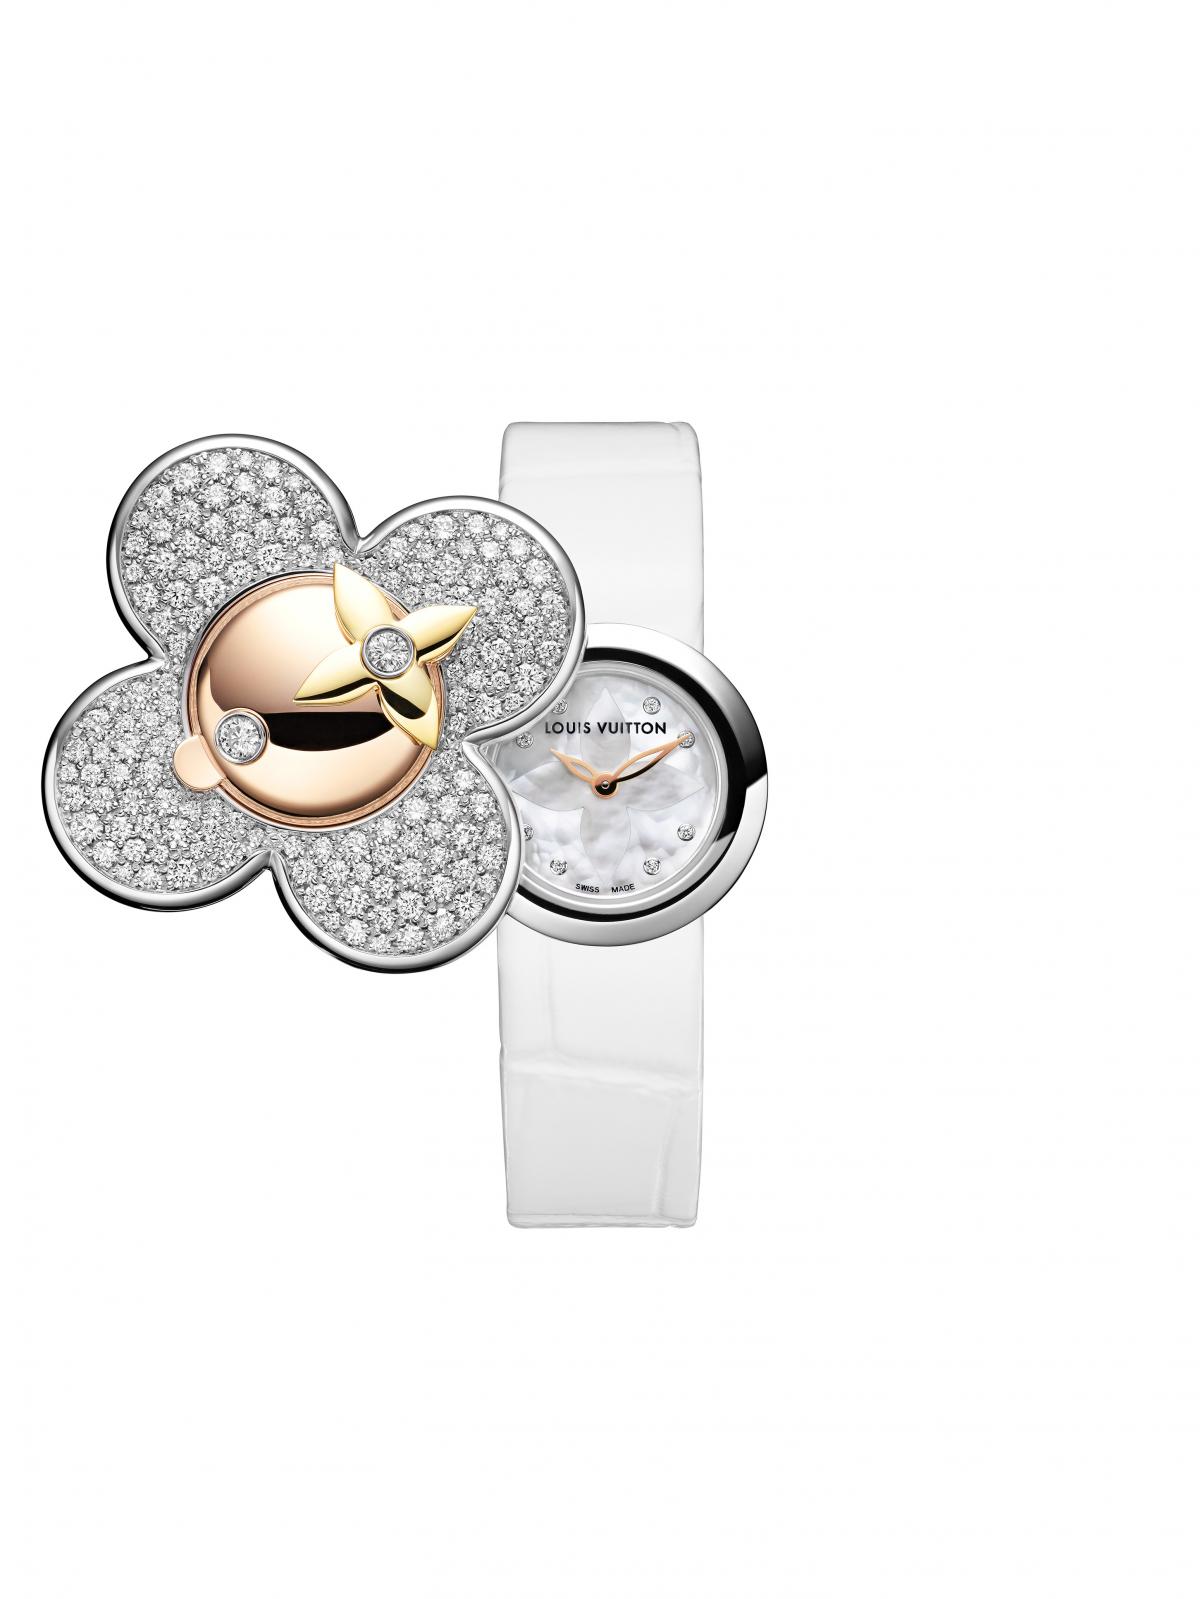 Introducing the Louis Vuitton Novelties at Watches and Wonders